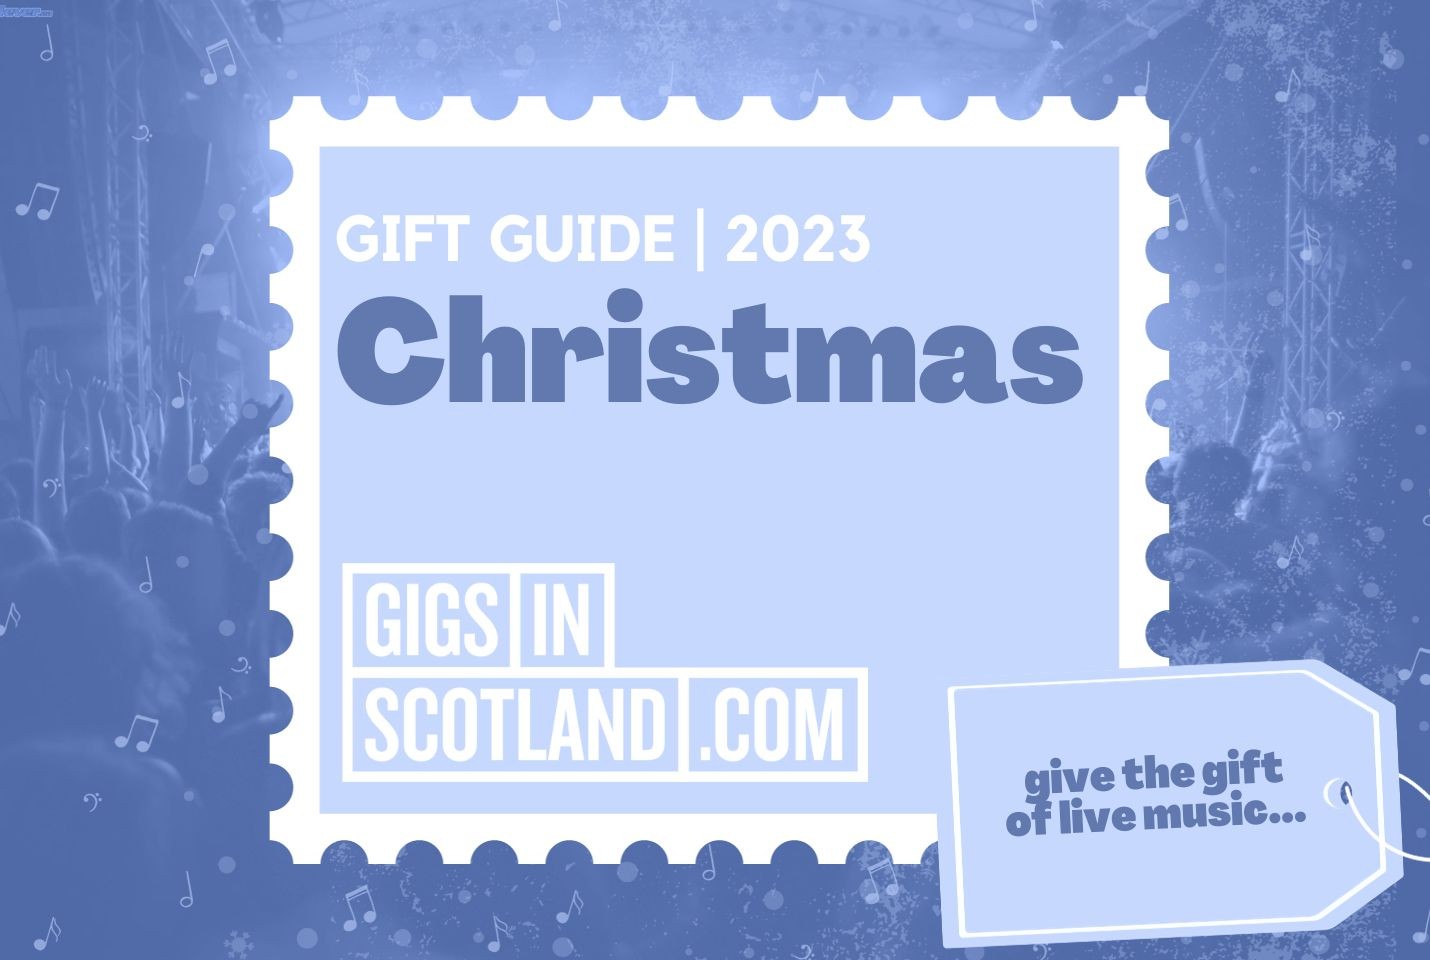 CHRISTMAS 2023: THE MUSIC GIFT GUIDE